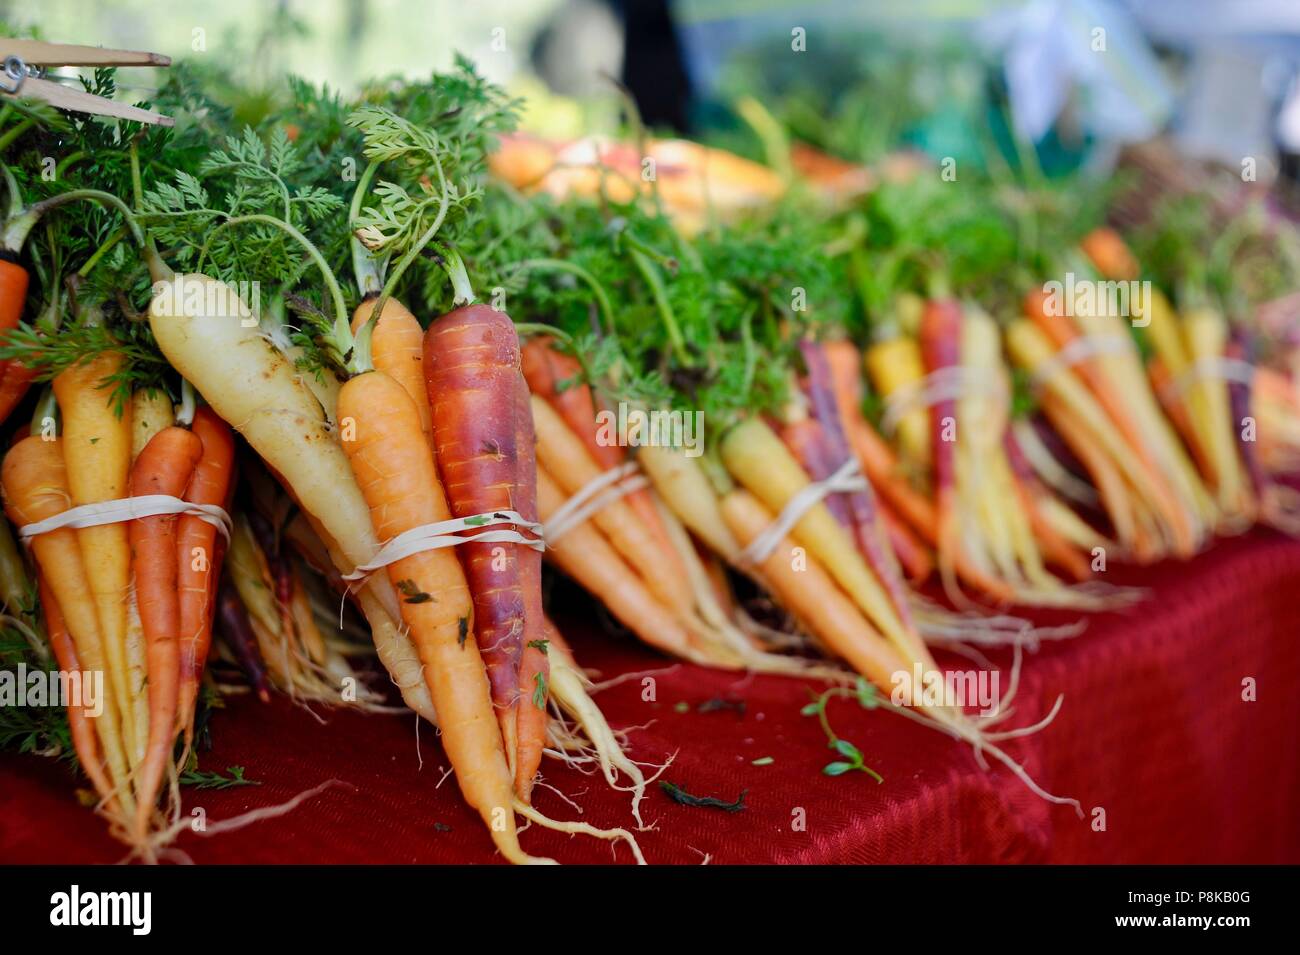 Tidy bundles of rainbow carrots (multicolored) at the Walker Farms farmstand for sale at farmers market in Savannah, Georgia, USA Stock Photo